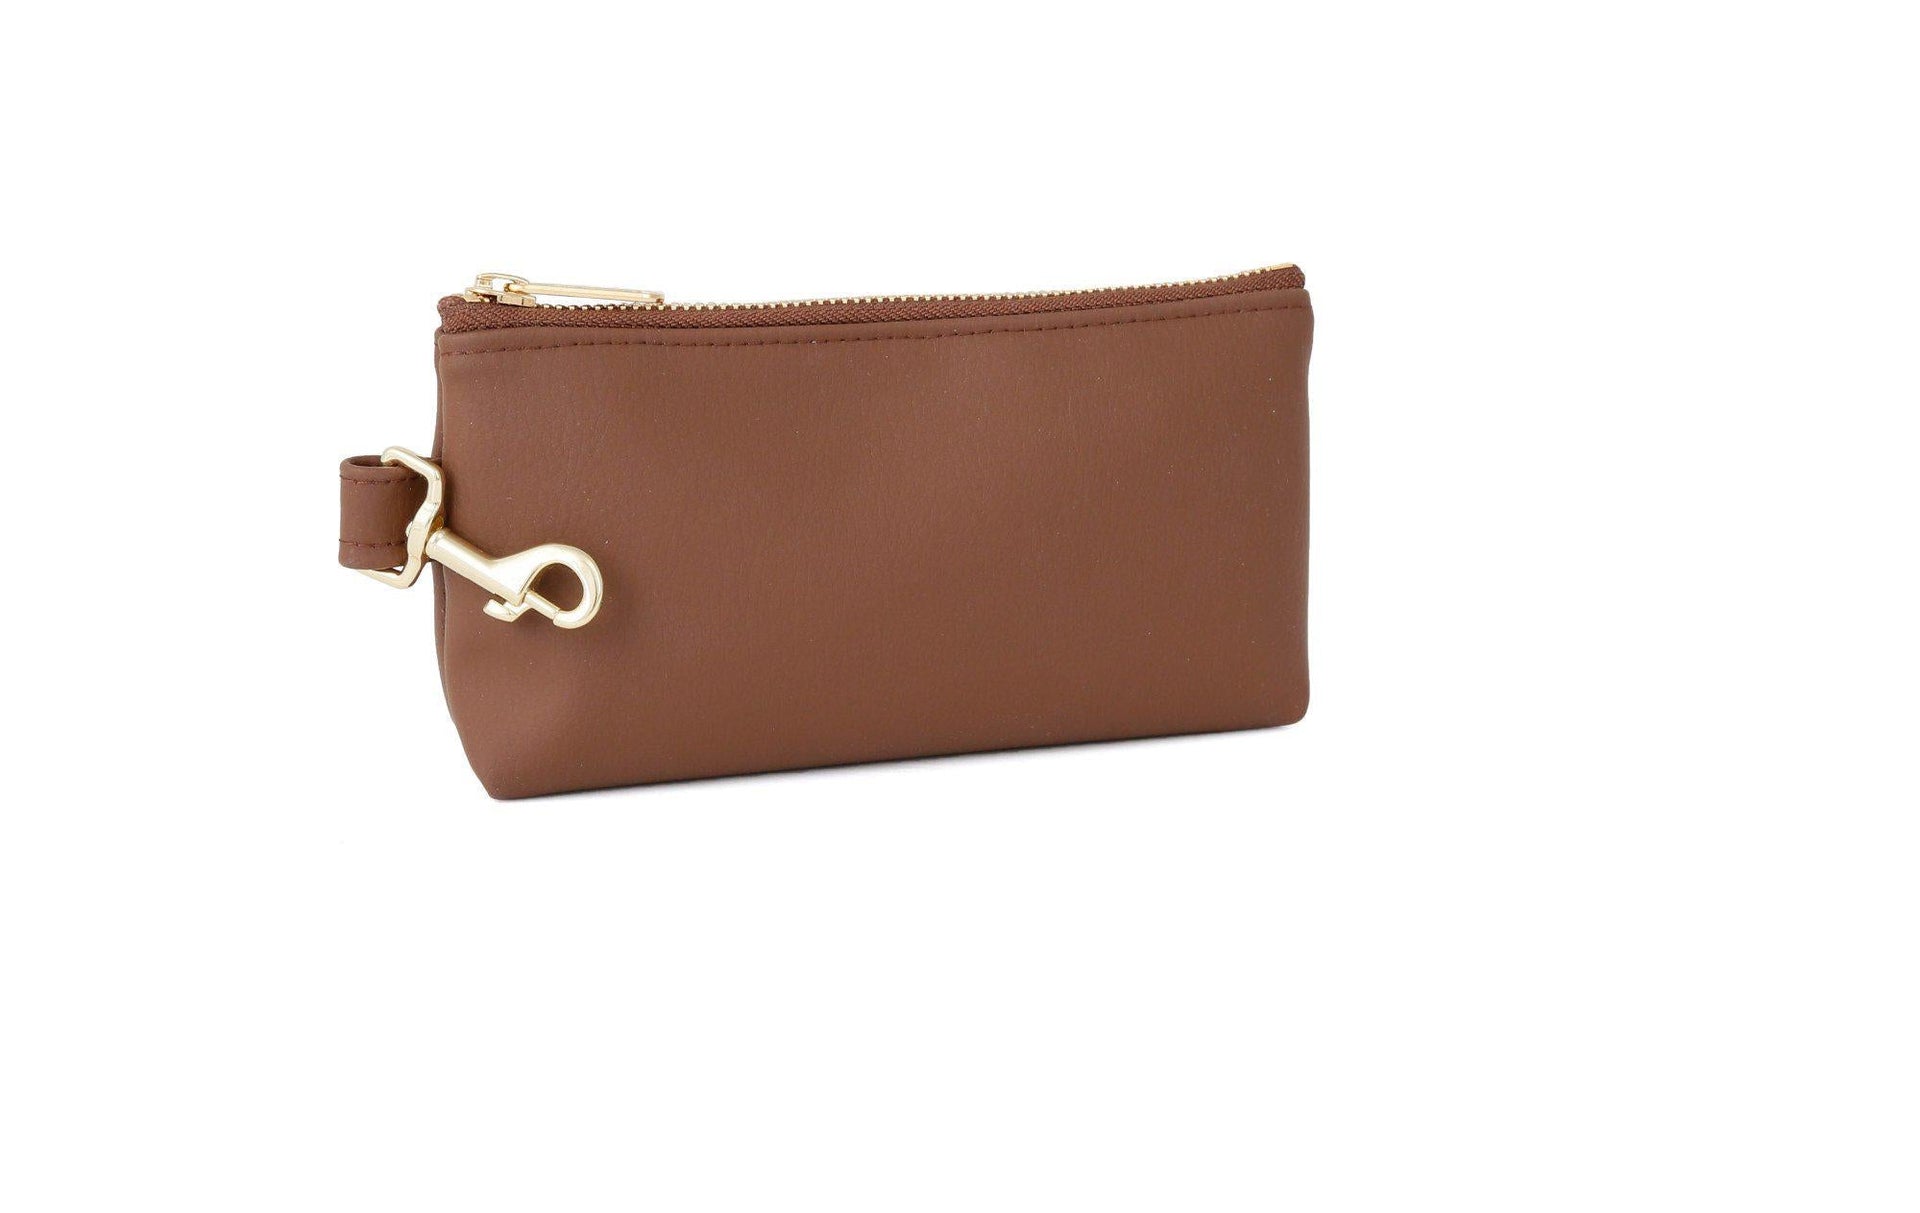 The Coco Brown Key Ring Wristlet by KEYPER